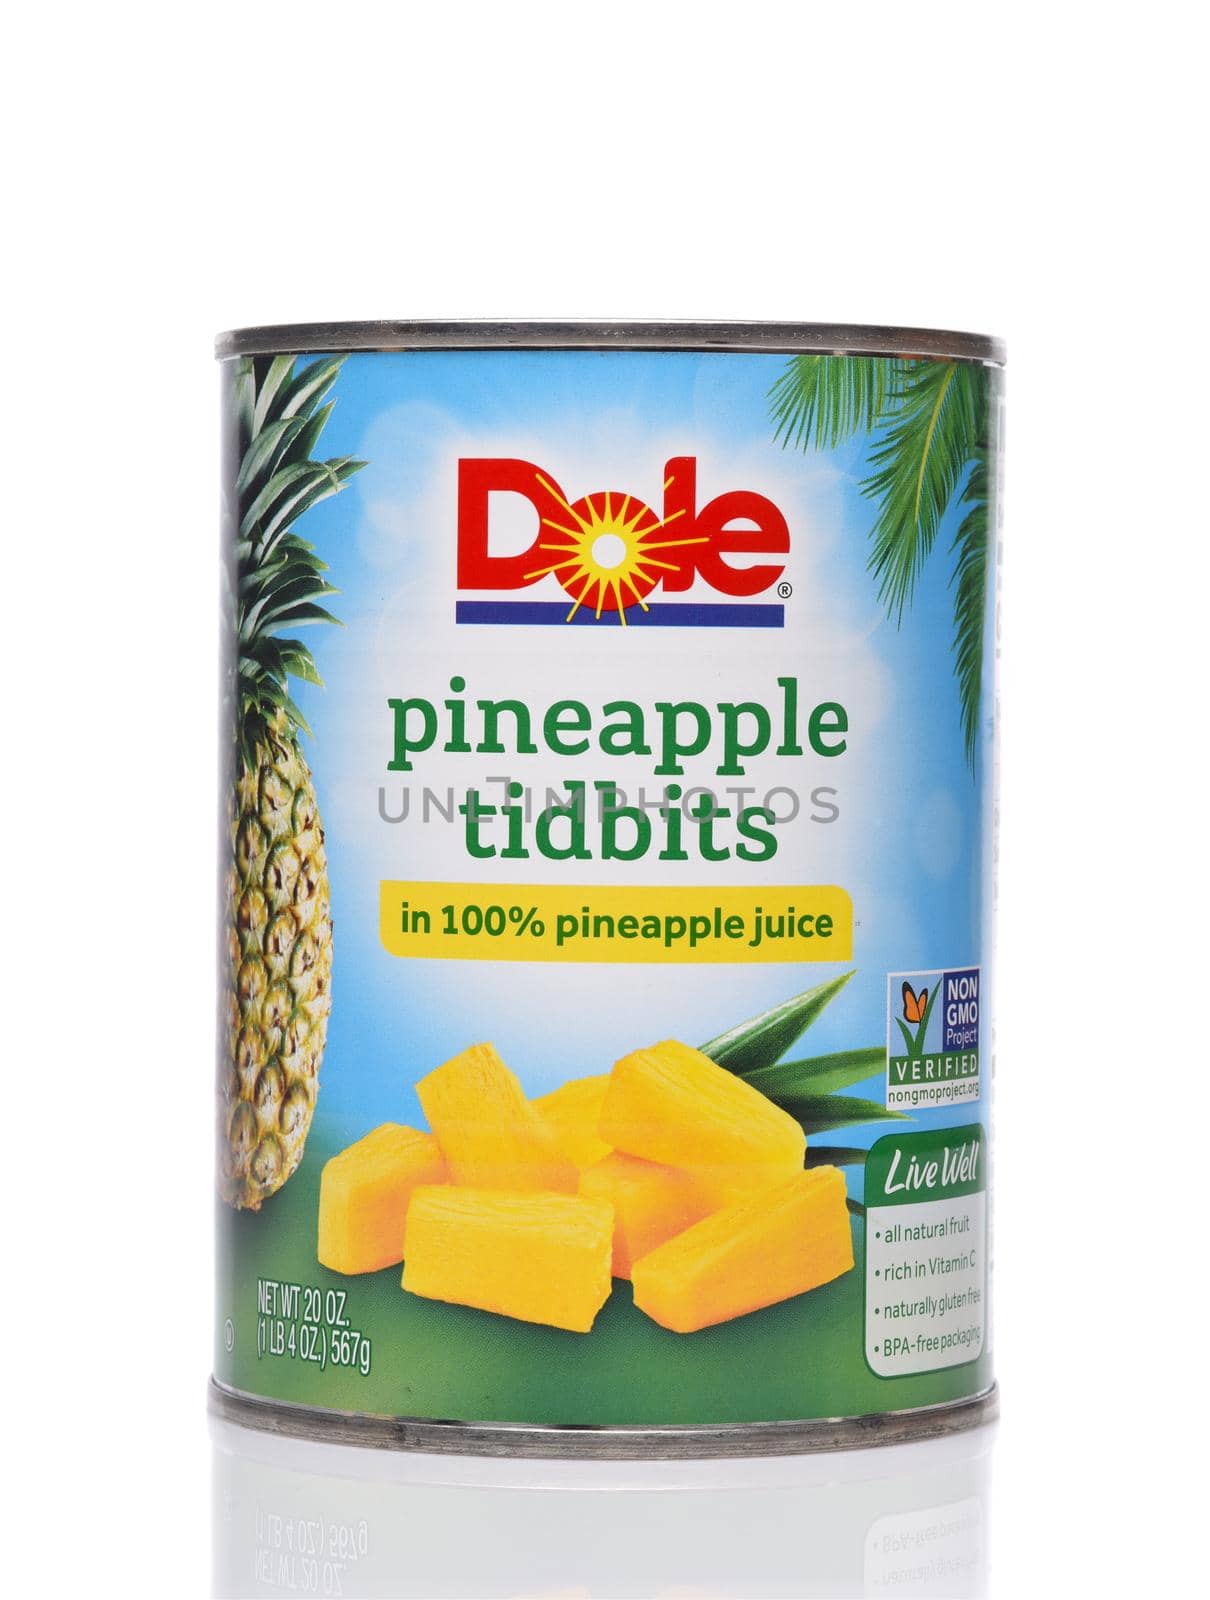 IRVINE, CALIFORNIA - 24 DECEMBER 2019: A can of Dole Pineapple Tidbits in pineapple juice. by sCukrov